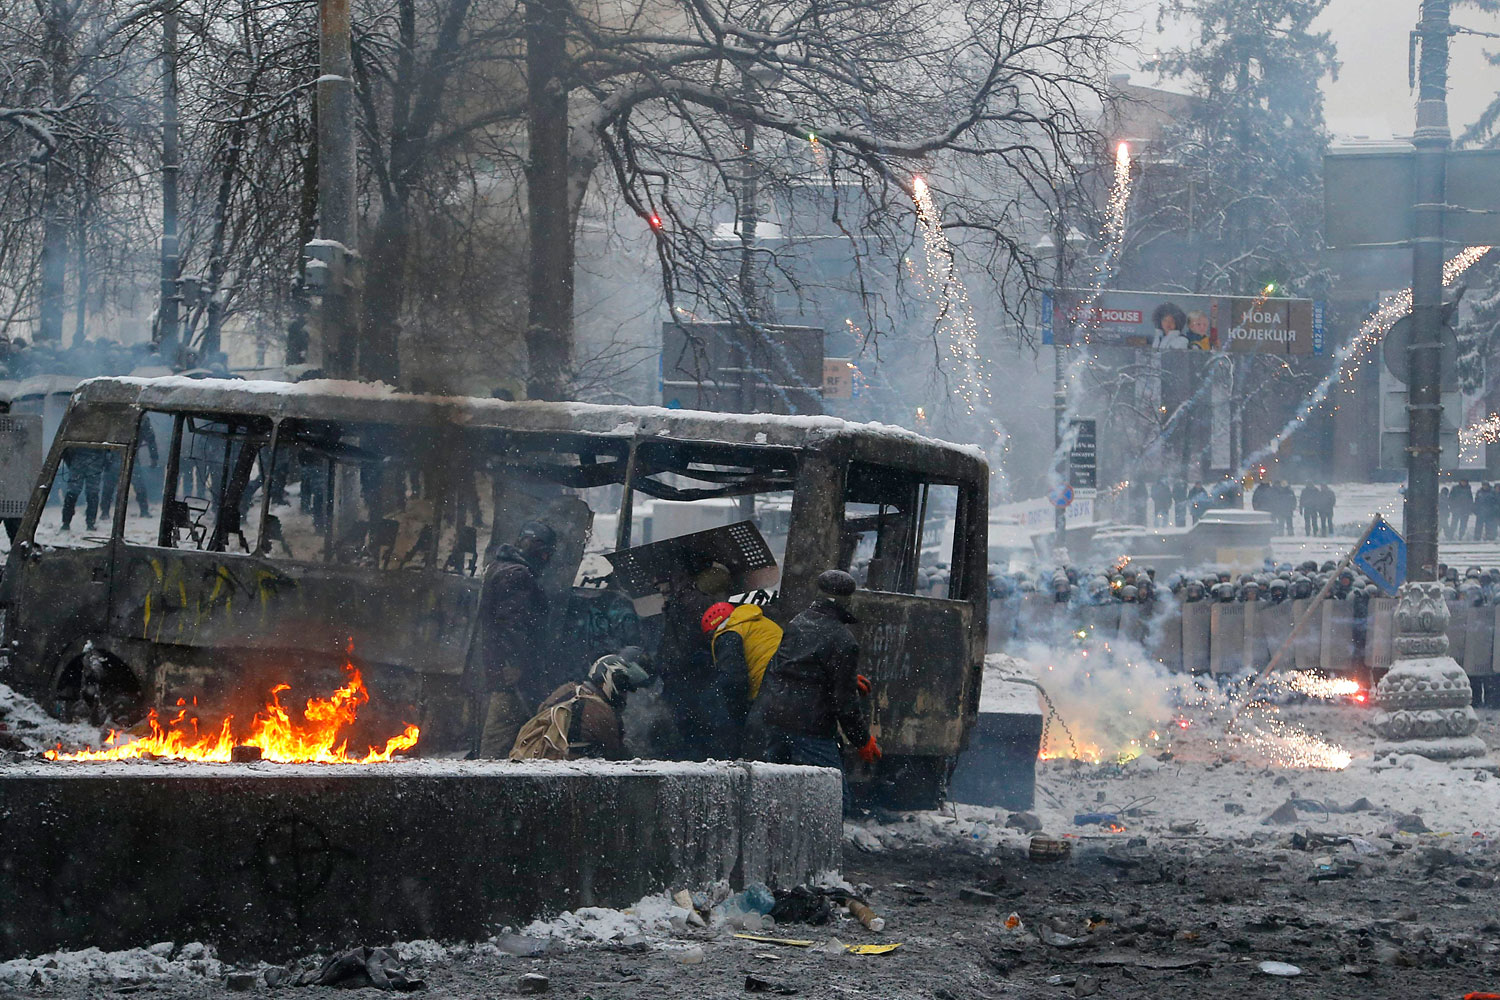 Protesters duck behind a burned vehicle as they clash with police in central Kiev, Jan. 22, 2014.